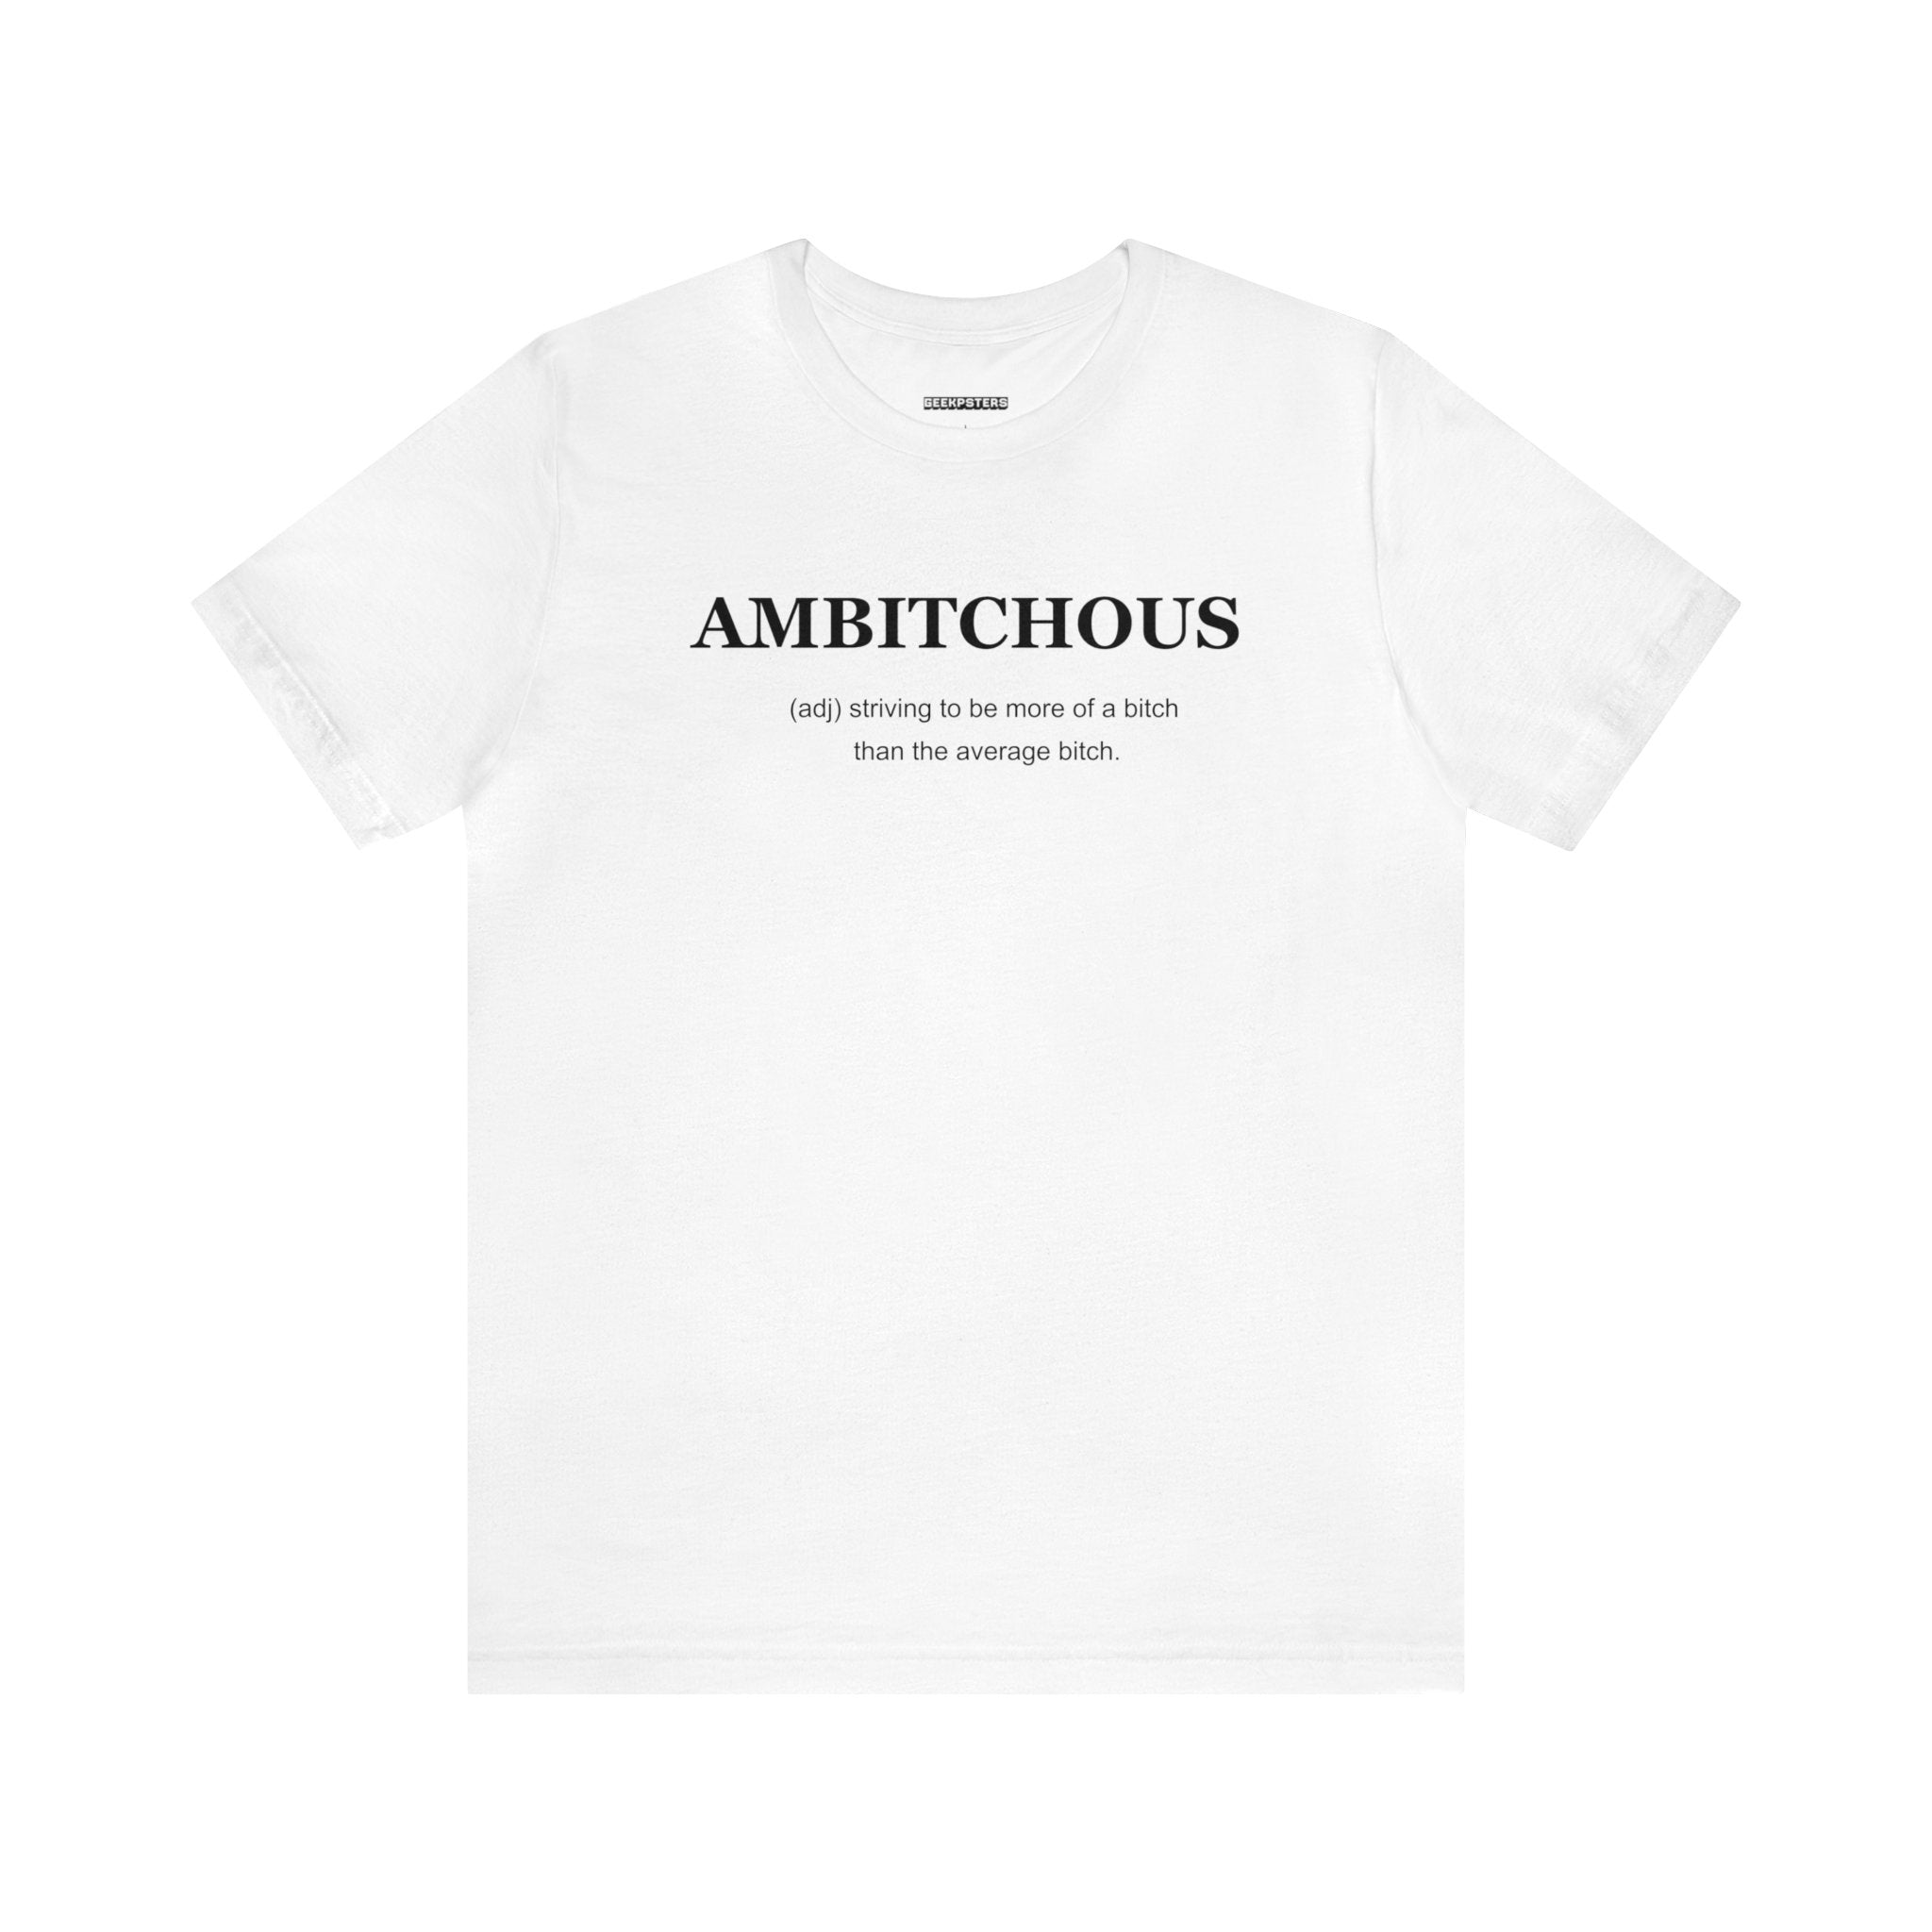 A white Ambitchious T Shirt with the empowering word "ambitious" printed on it.